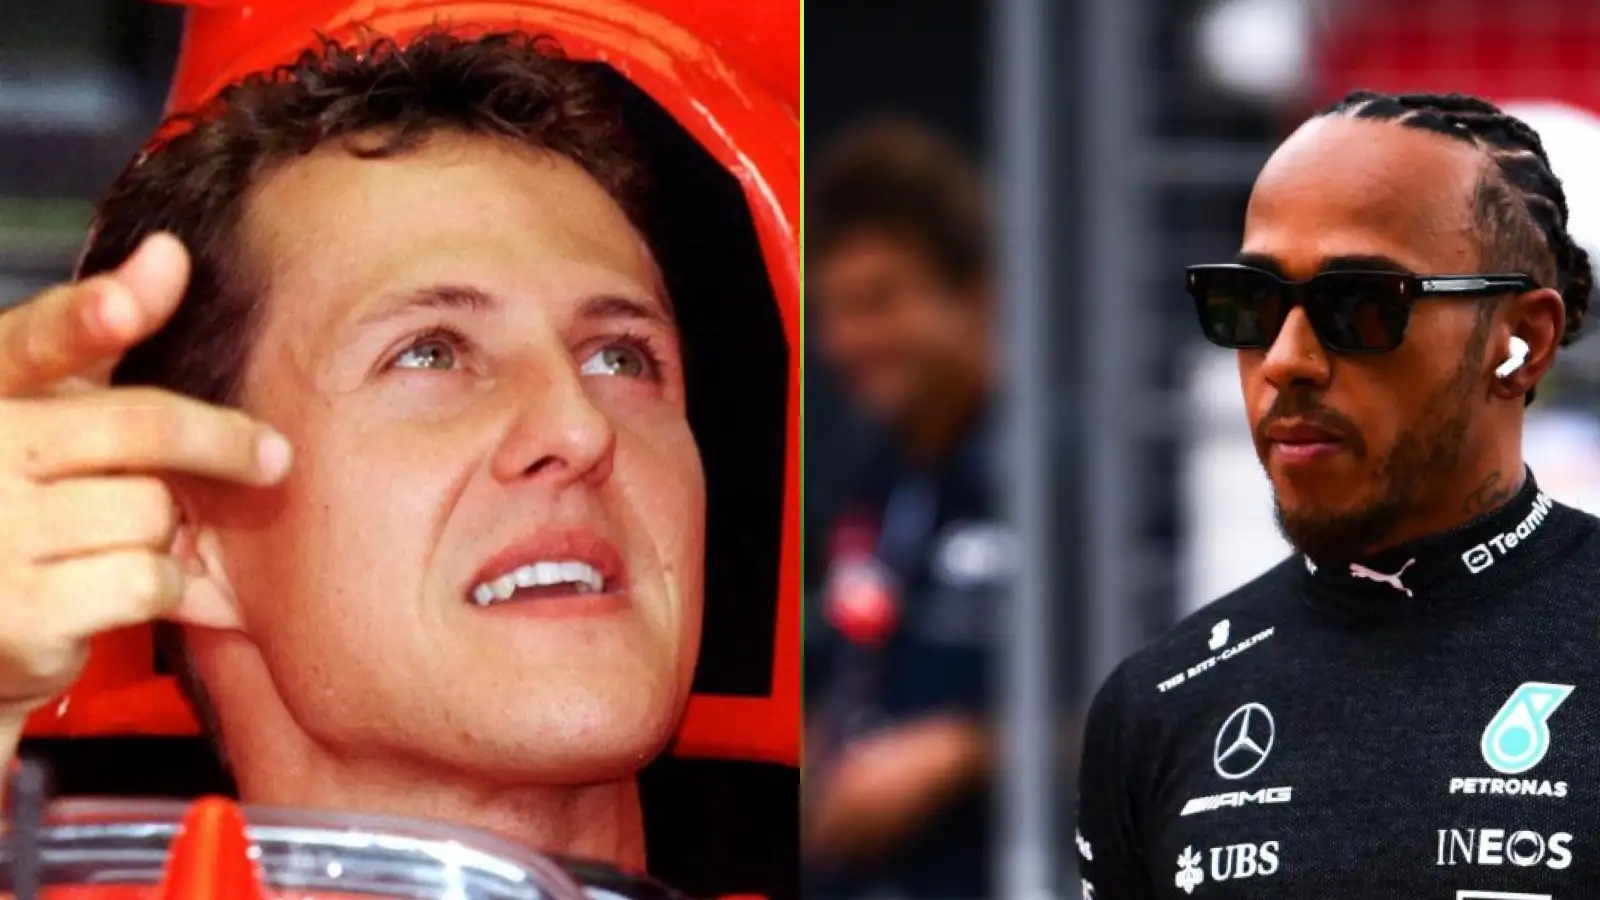 Michael Schumacher and Lewis Hamilton side by side